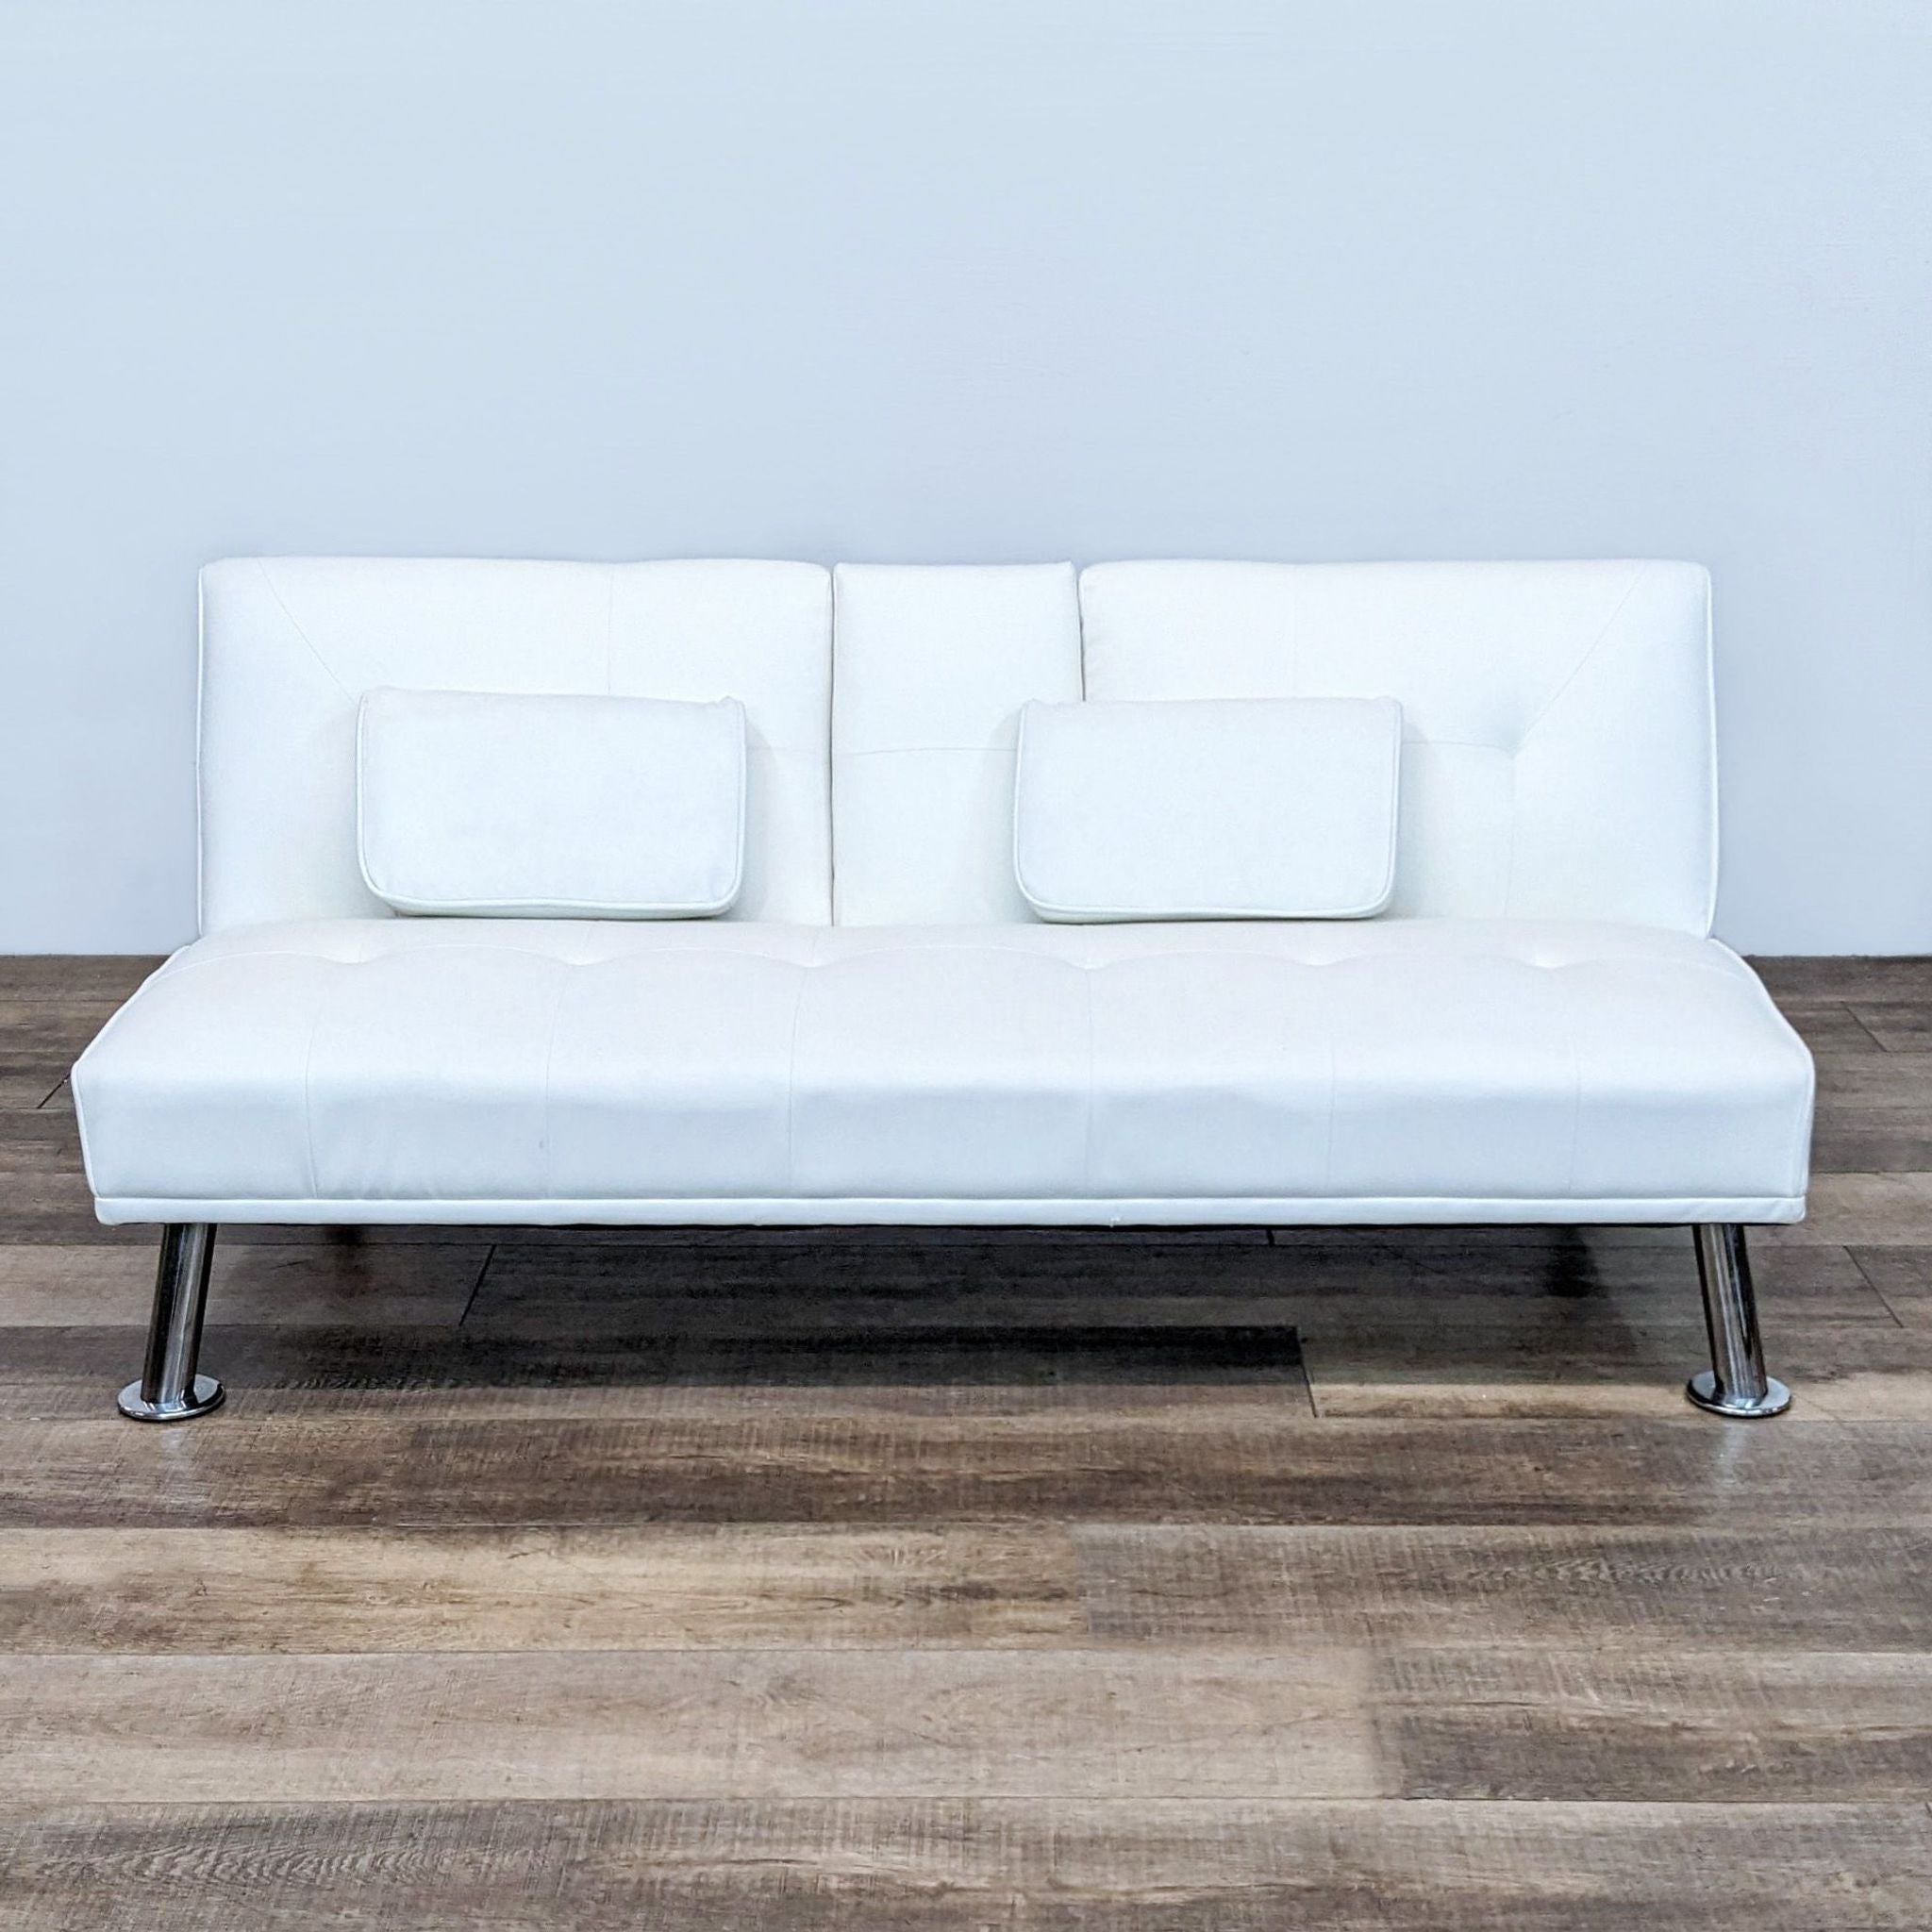 Alt text 1: White Reperch sleeper sofa in an upright position on a wooden floor against a plain backdrop.